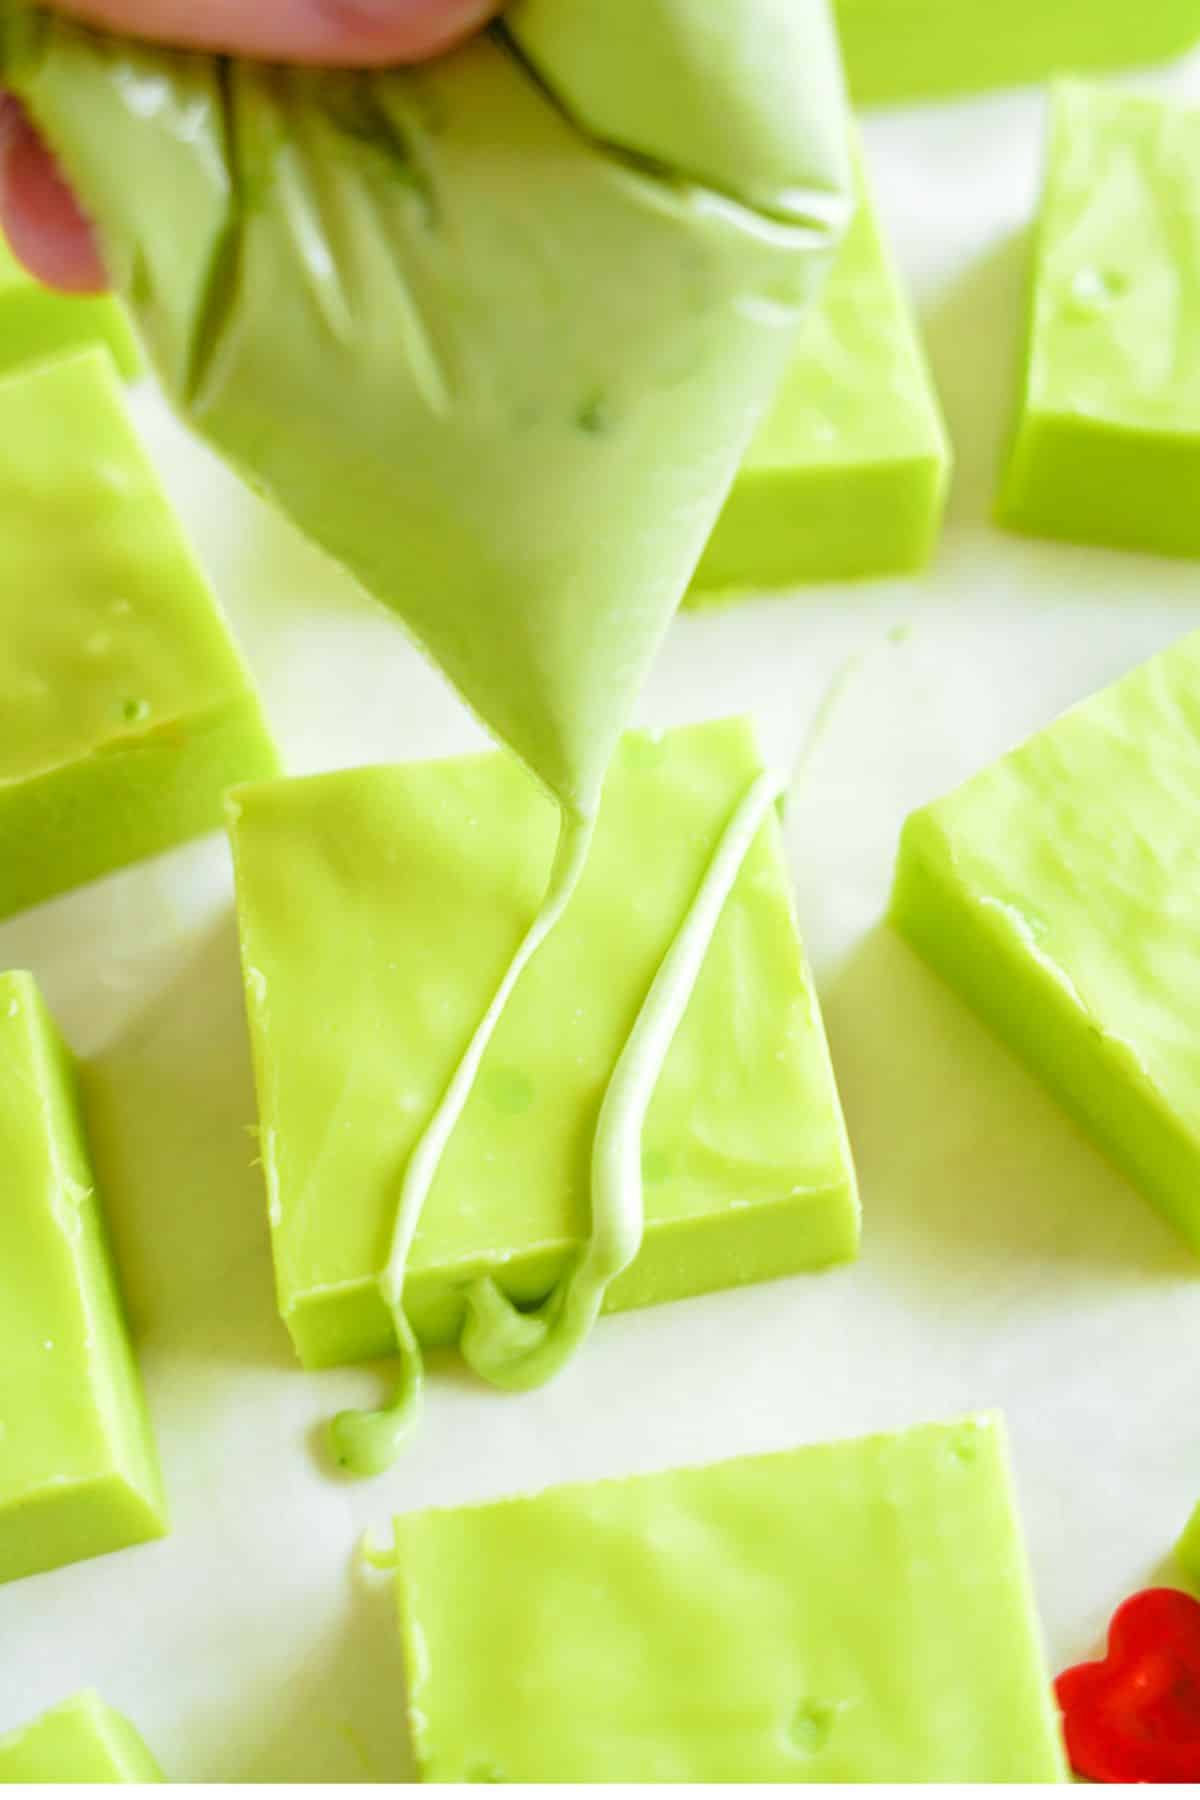 piping bag drizzling green chocolate on fudge